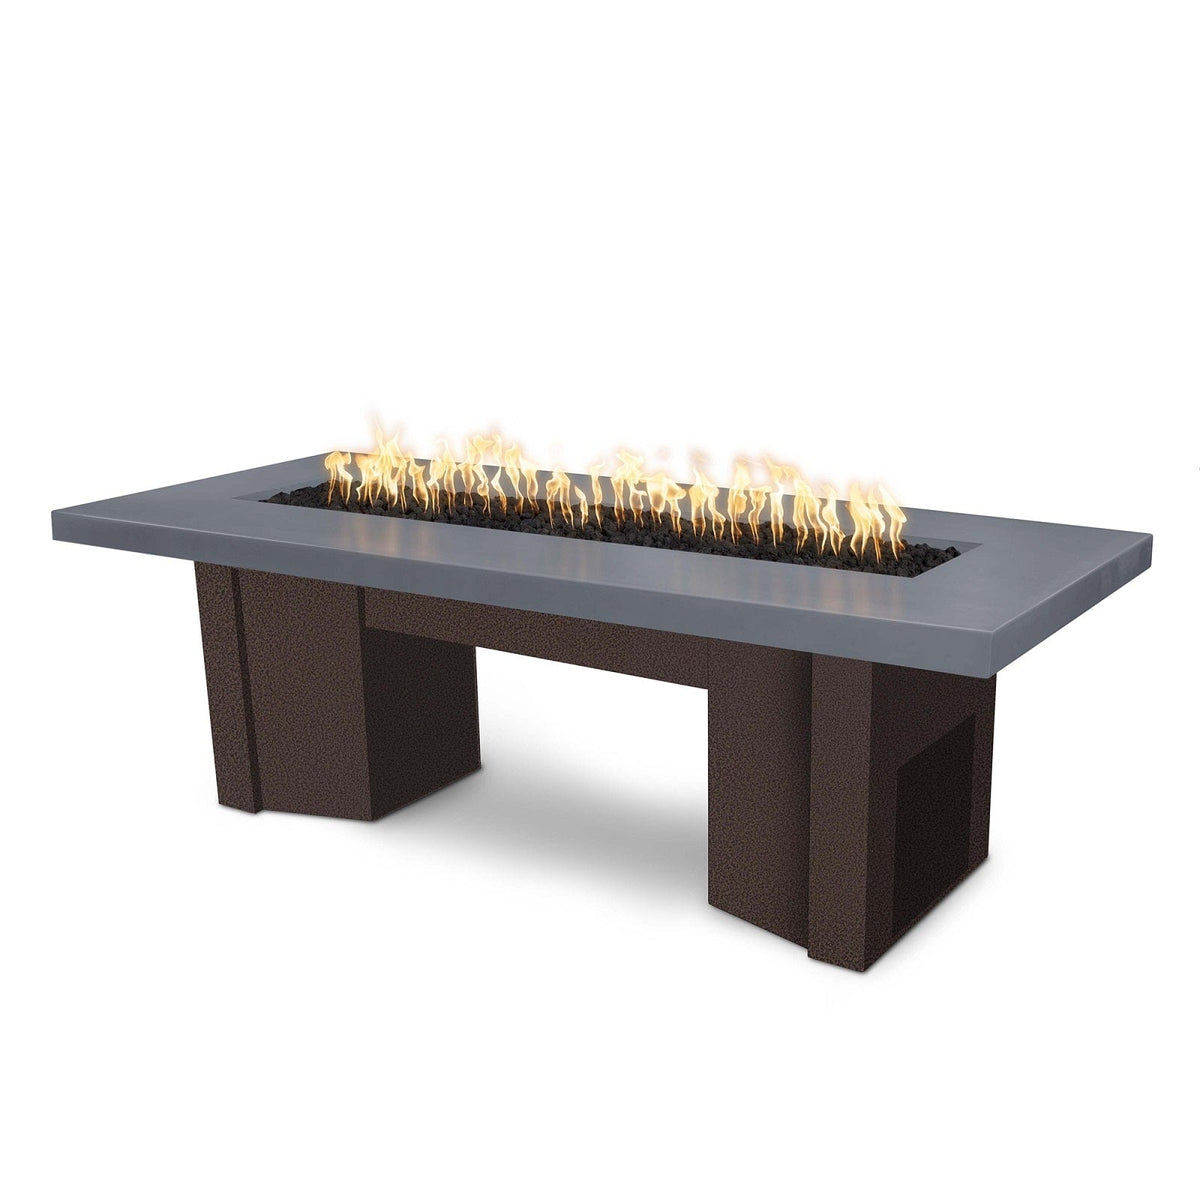 The Outdoor Plus Fire Features Gray (-GRY) / Copper Vein Powder Coated Steel (-CPV) The Outdoor Plus 78&quot; Alameda Fire Table Smooth Concrete in Liquid Propane - Flame Sense System with Push Button Spark Igniter / OPT-ALMGFRC78FSEN-LP